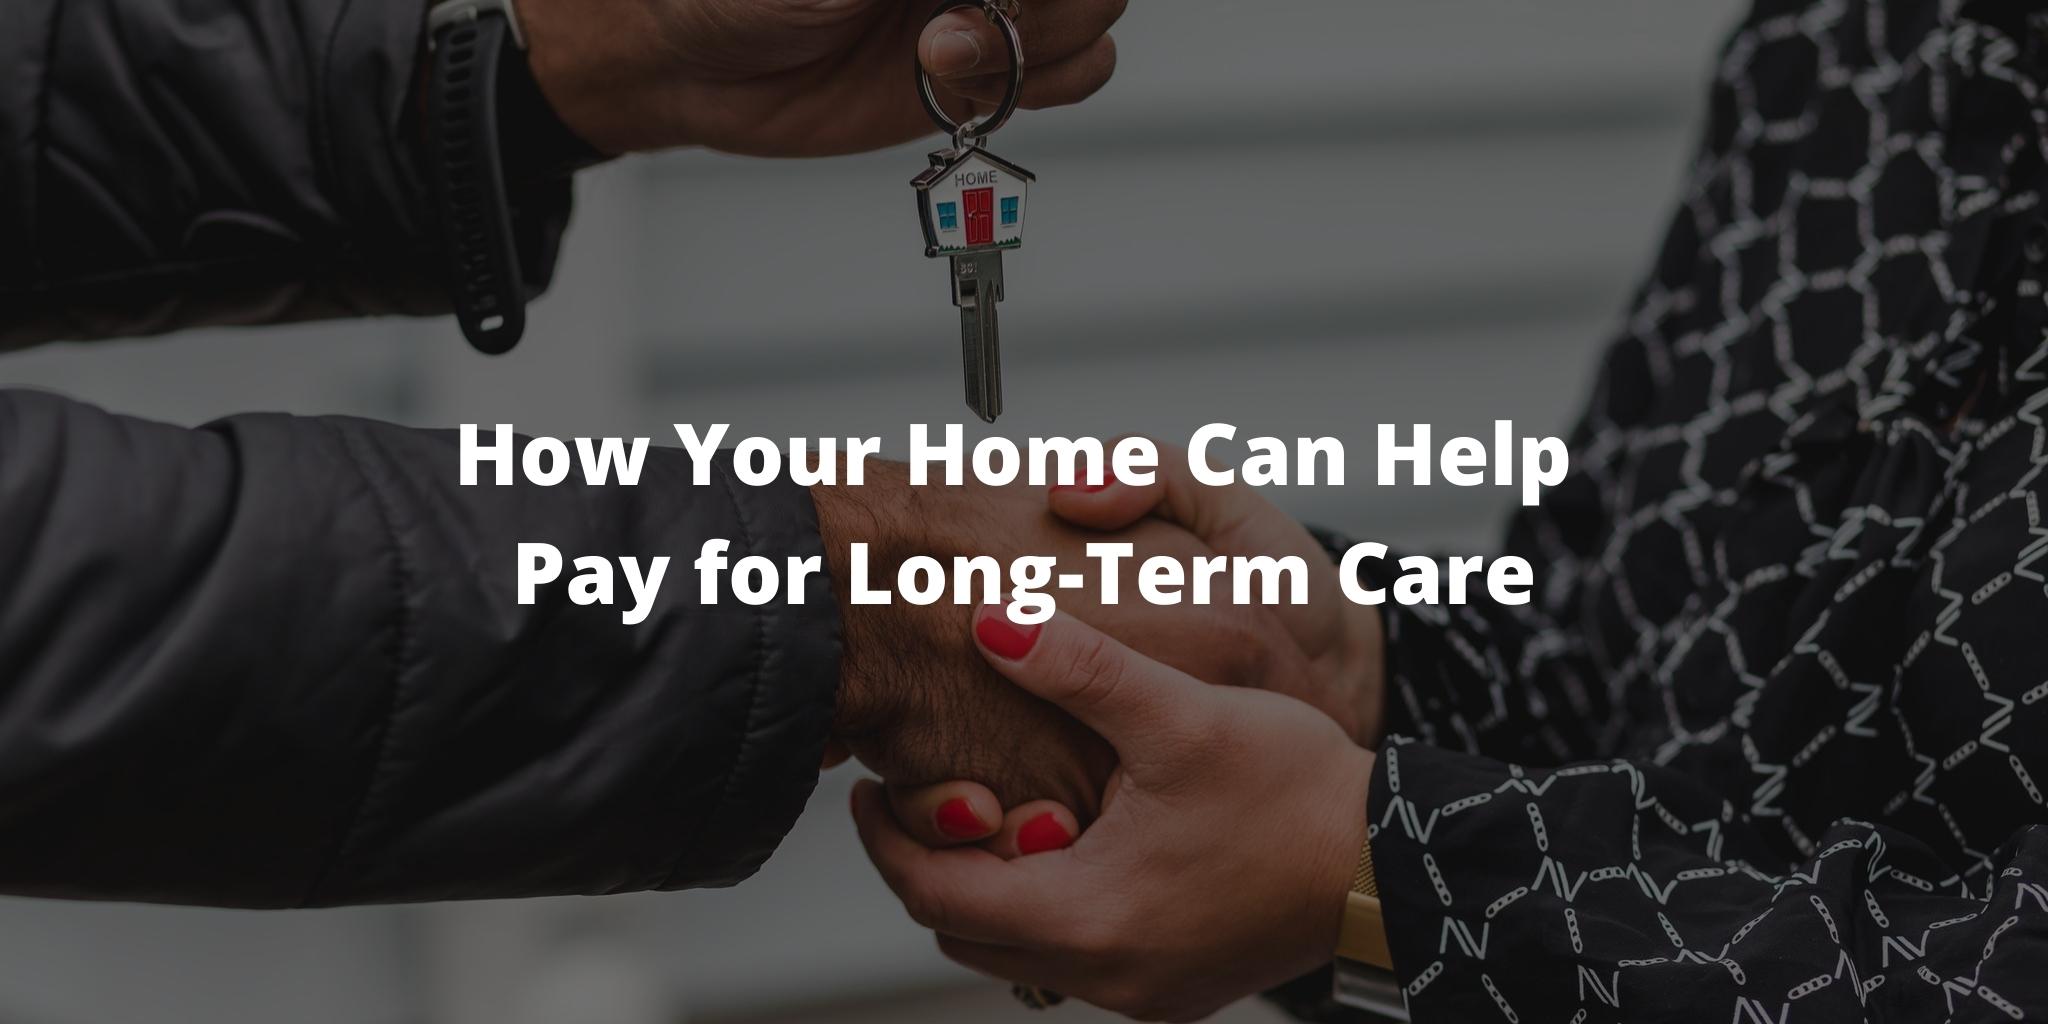 How Your Home Can Help Pay for Long-Term Care